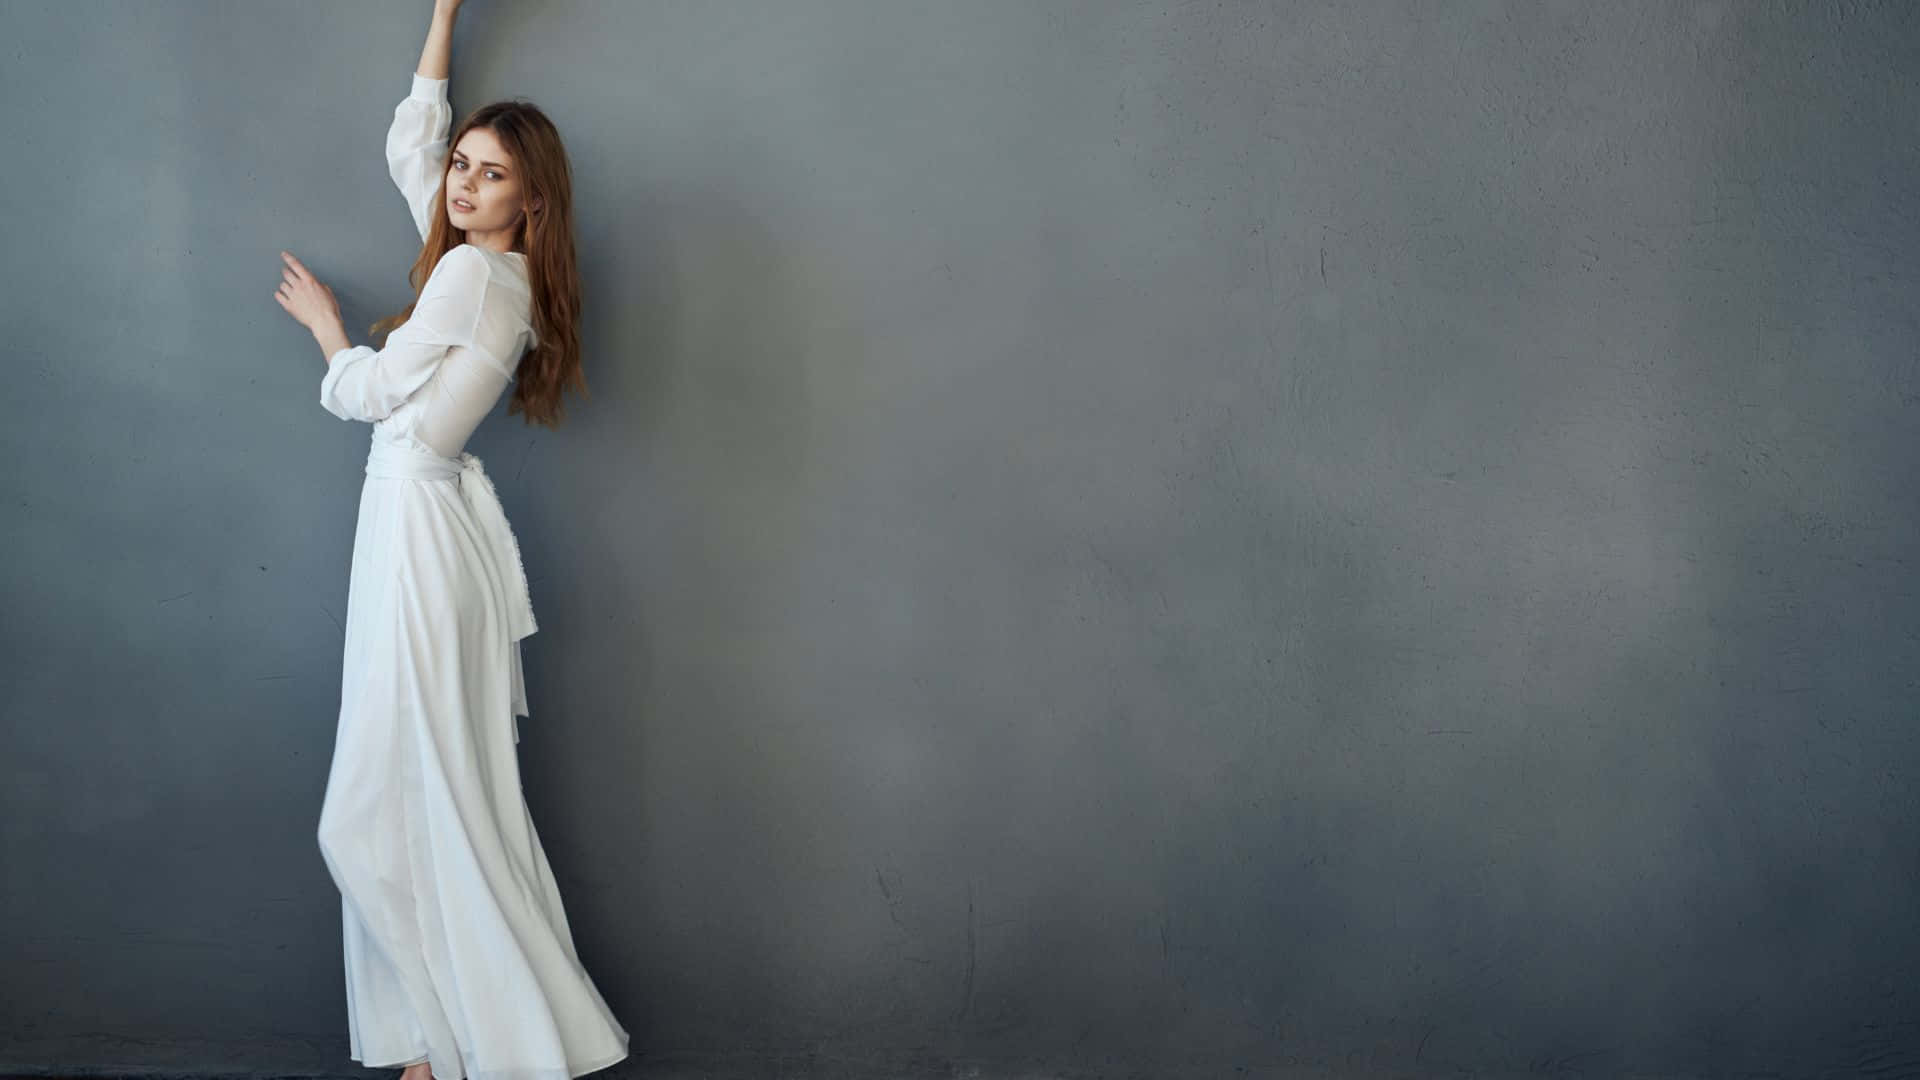 A Woman In A White Dress Leaning Against A Gray Wall